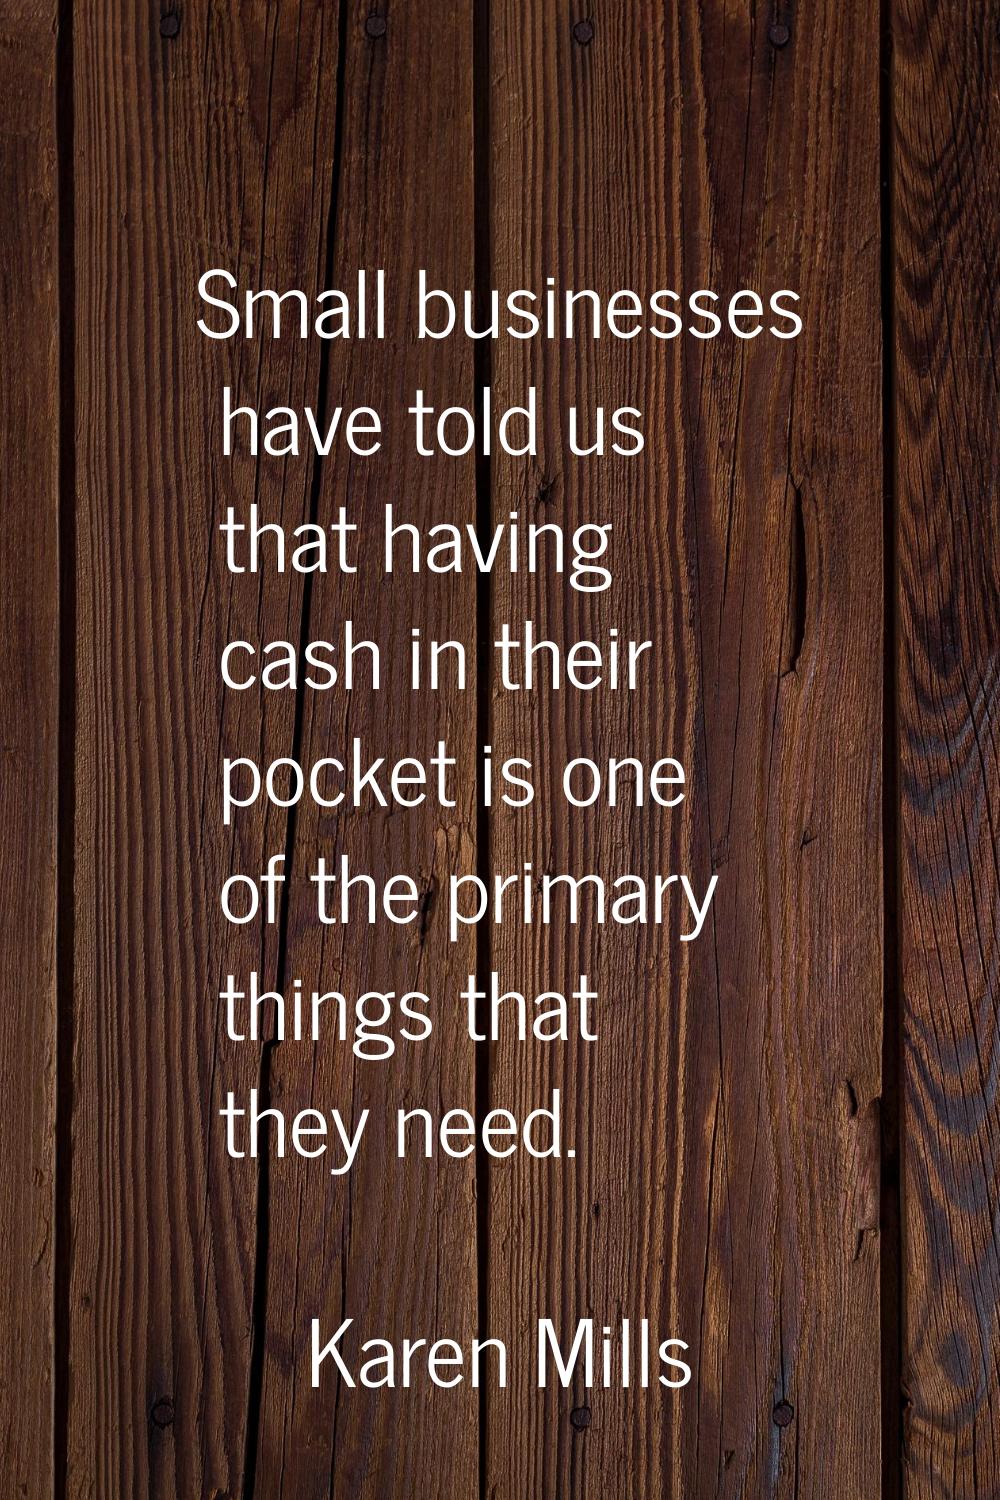 Small businesses have told us that having cash in their pocket is one of the primary things that th